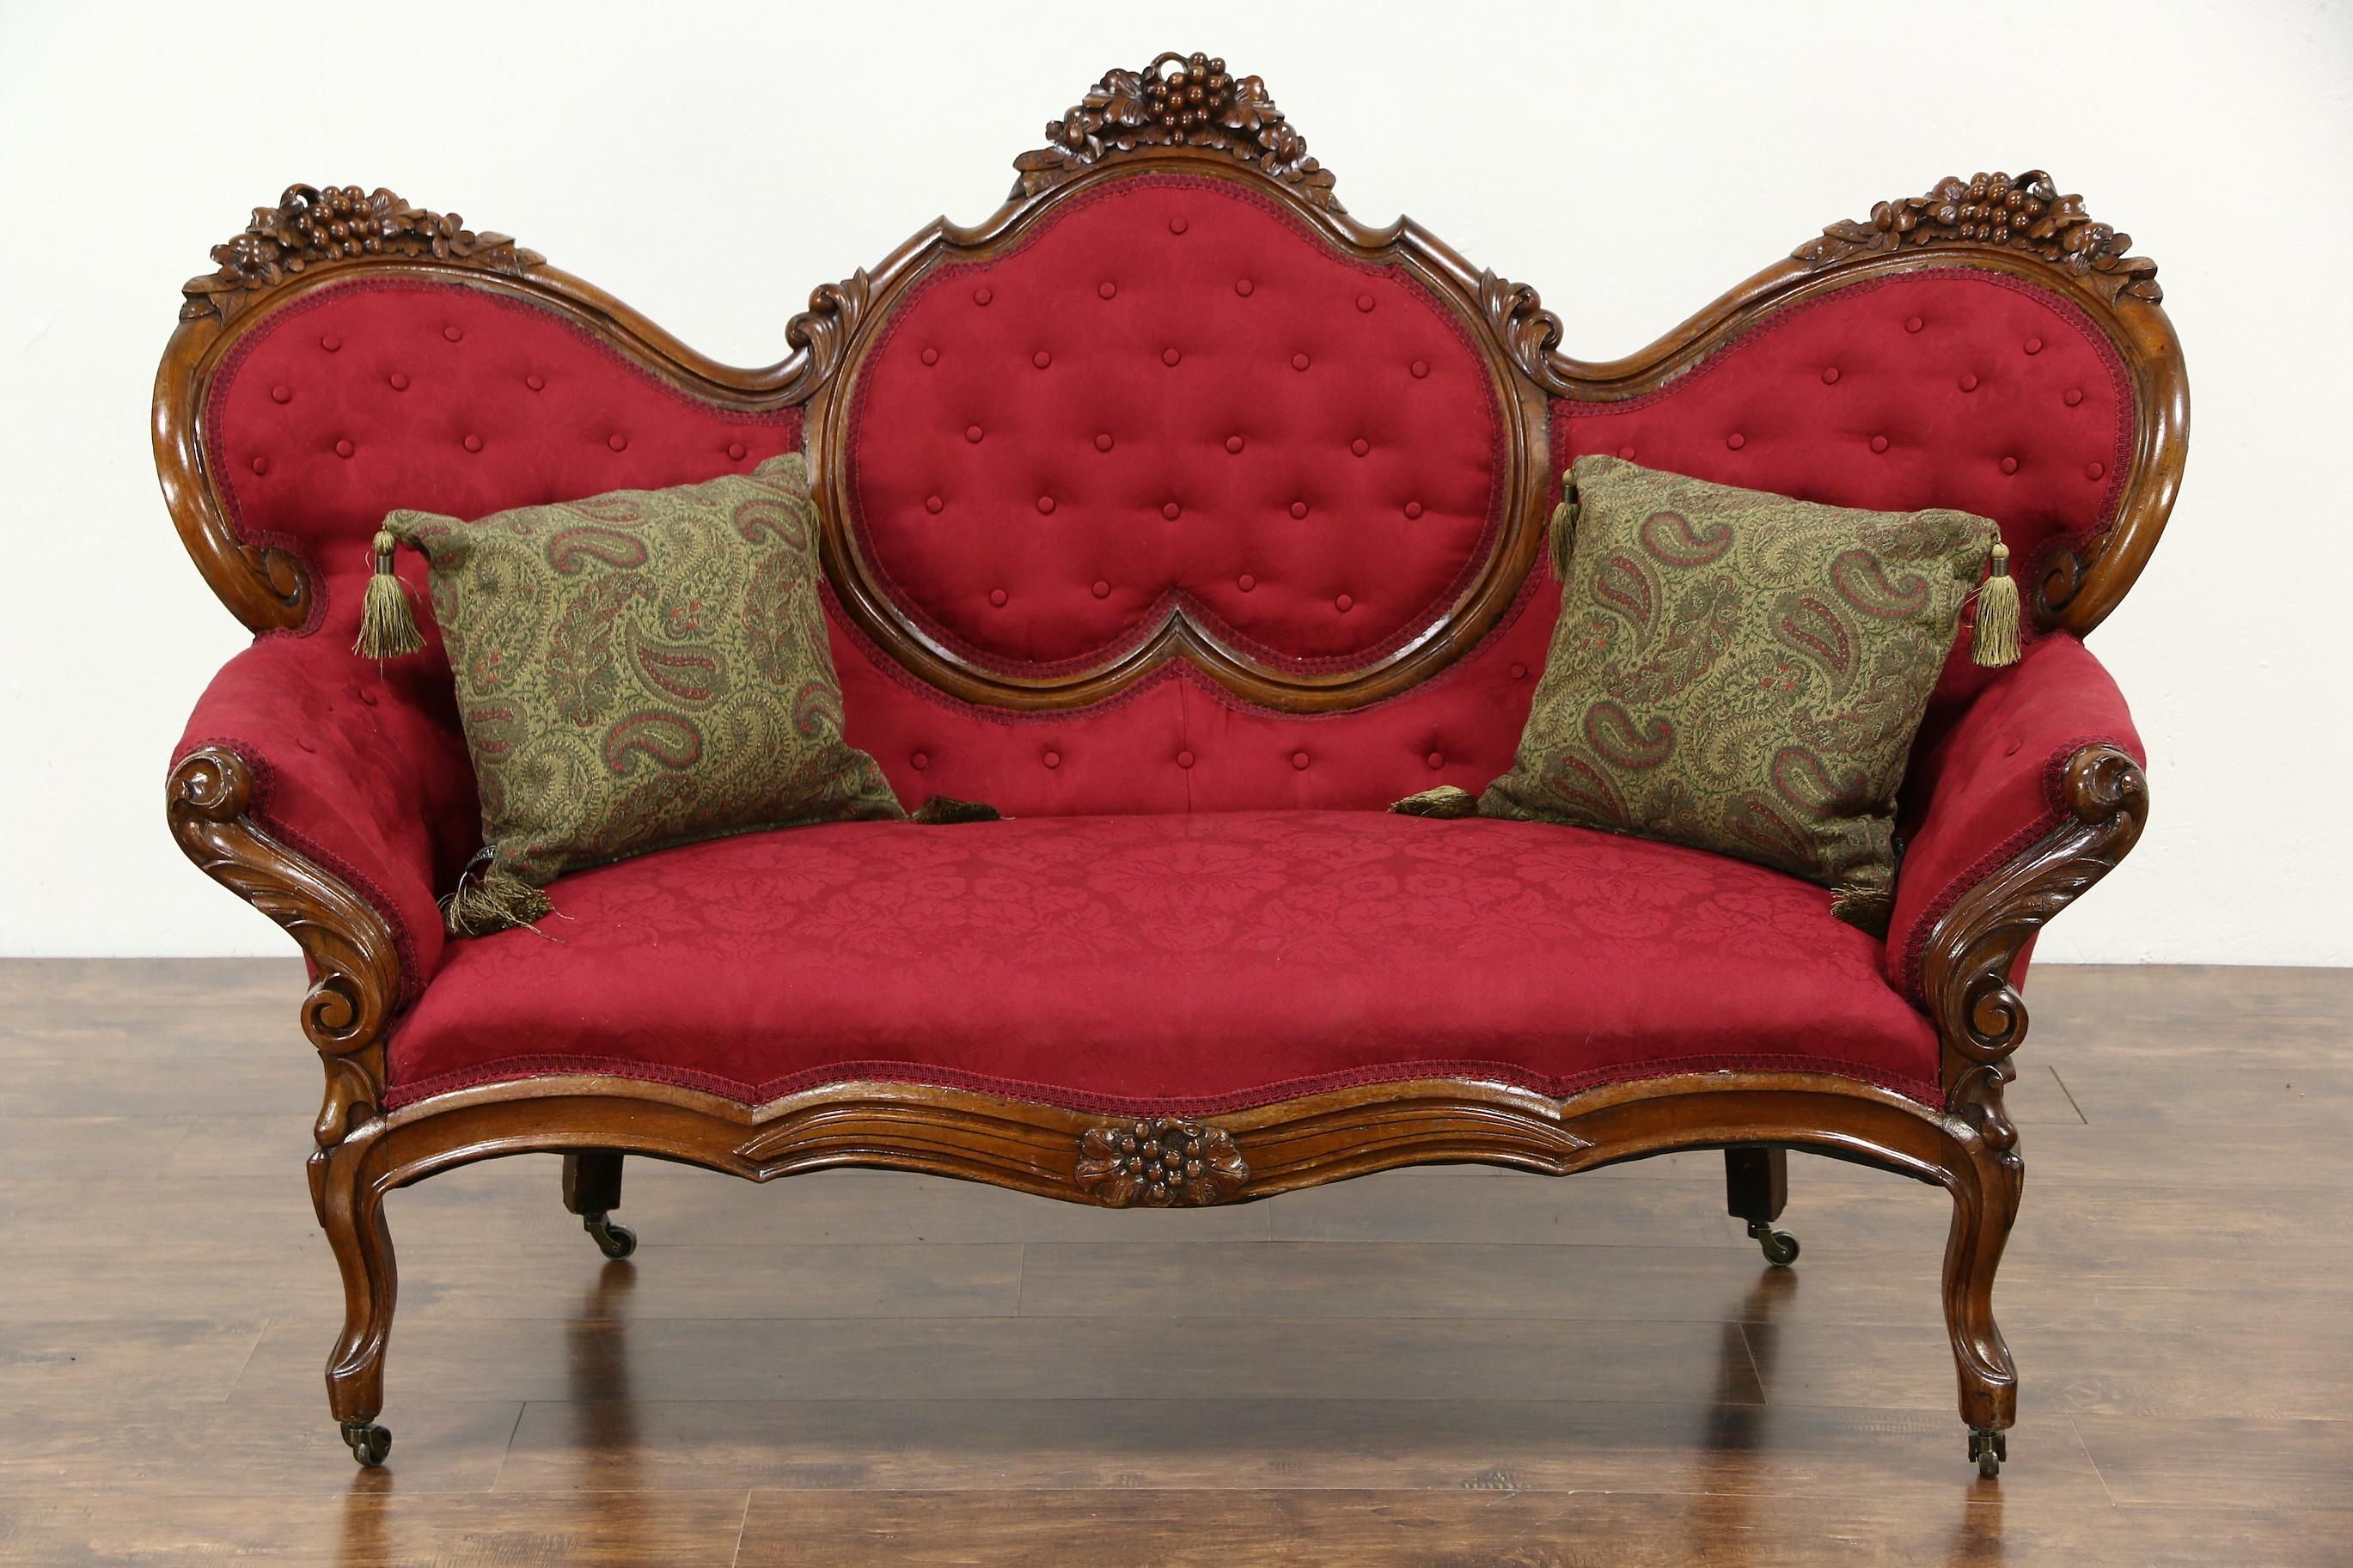 Sold – Victorian 1860's Antique Grape Carved Walnut Sofa, New Regarding Antique Sofa Chairs (View 3 of 20)